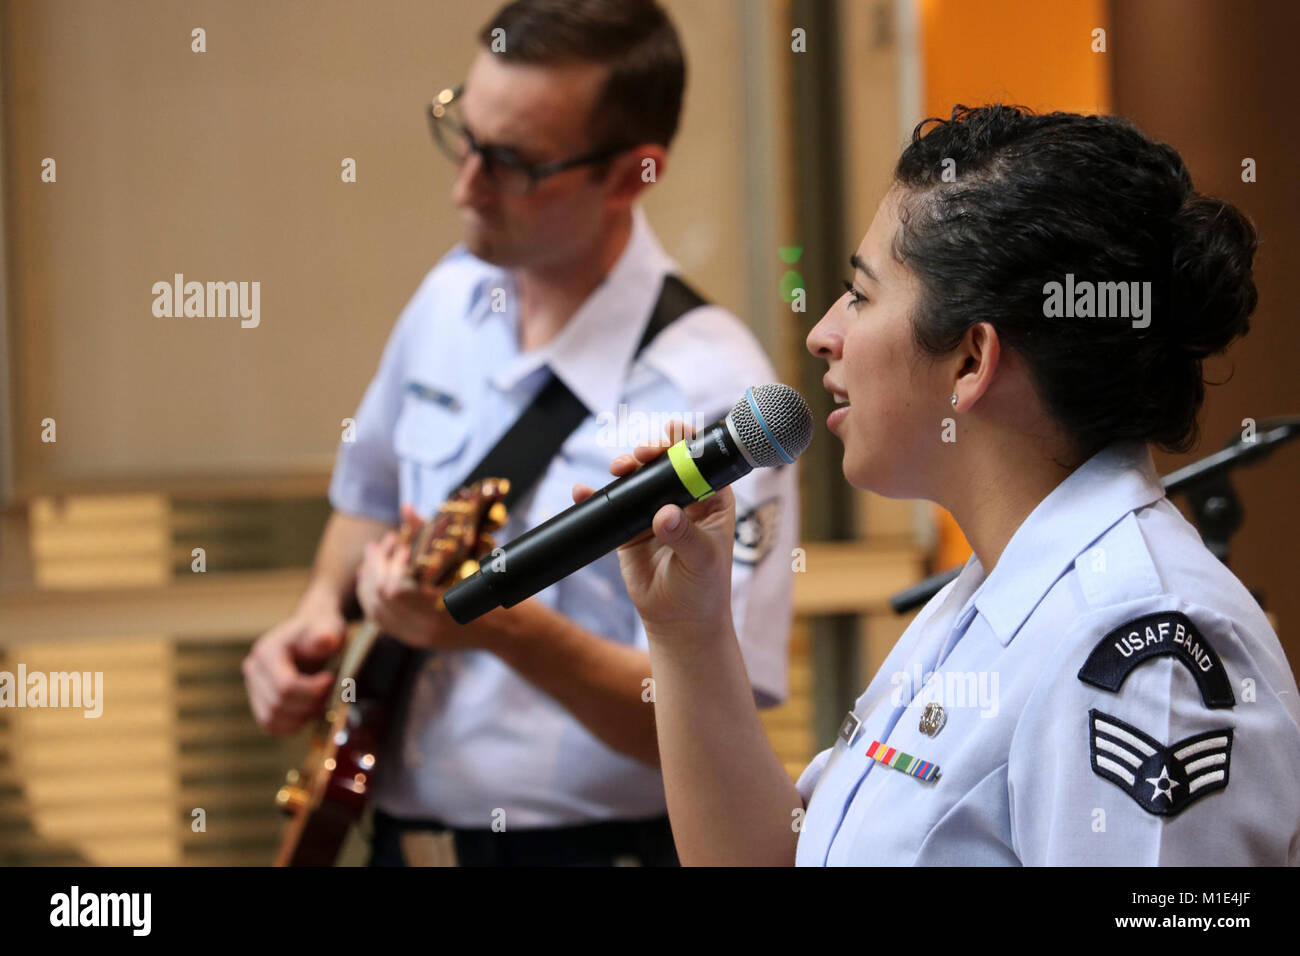 Senior Airman Alycia Cancel, U.S. Air Force Band of Pacific-Asia vocalist, sings during a concert in Saitama, Japan, Sept. 26, 2017. Cancel performs at various locations throughout the Indo-Asia Pacific Region to strengthen the relations with our host nations and to support military ceremonies such as retirements, award ceremonies, graduations, promotions and change of commands, at various schools, parades and sporting events. (U.S. Air Force Stock Photo